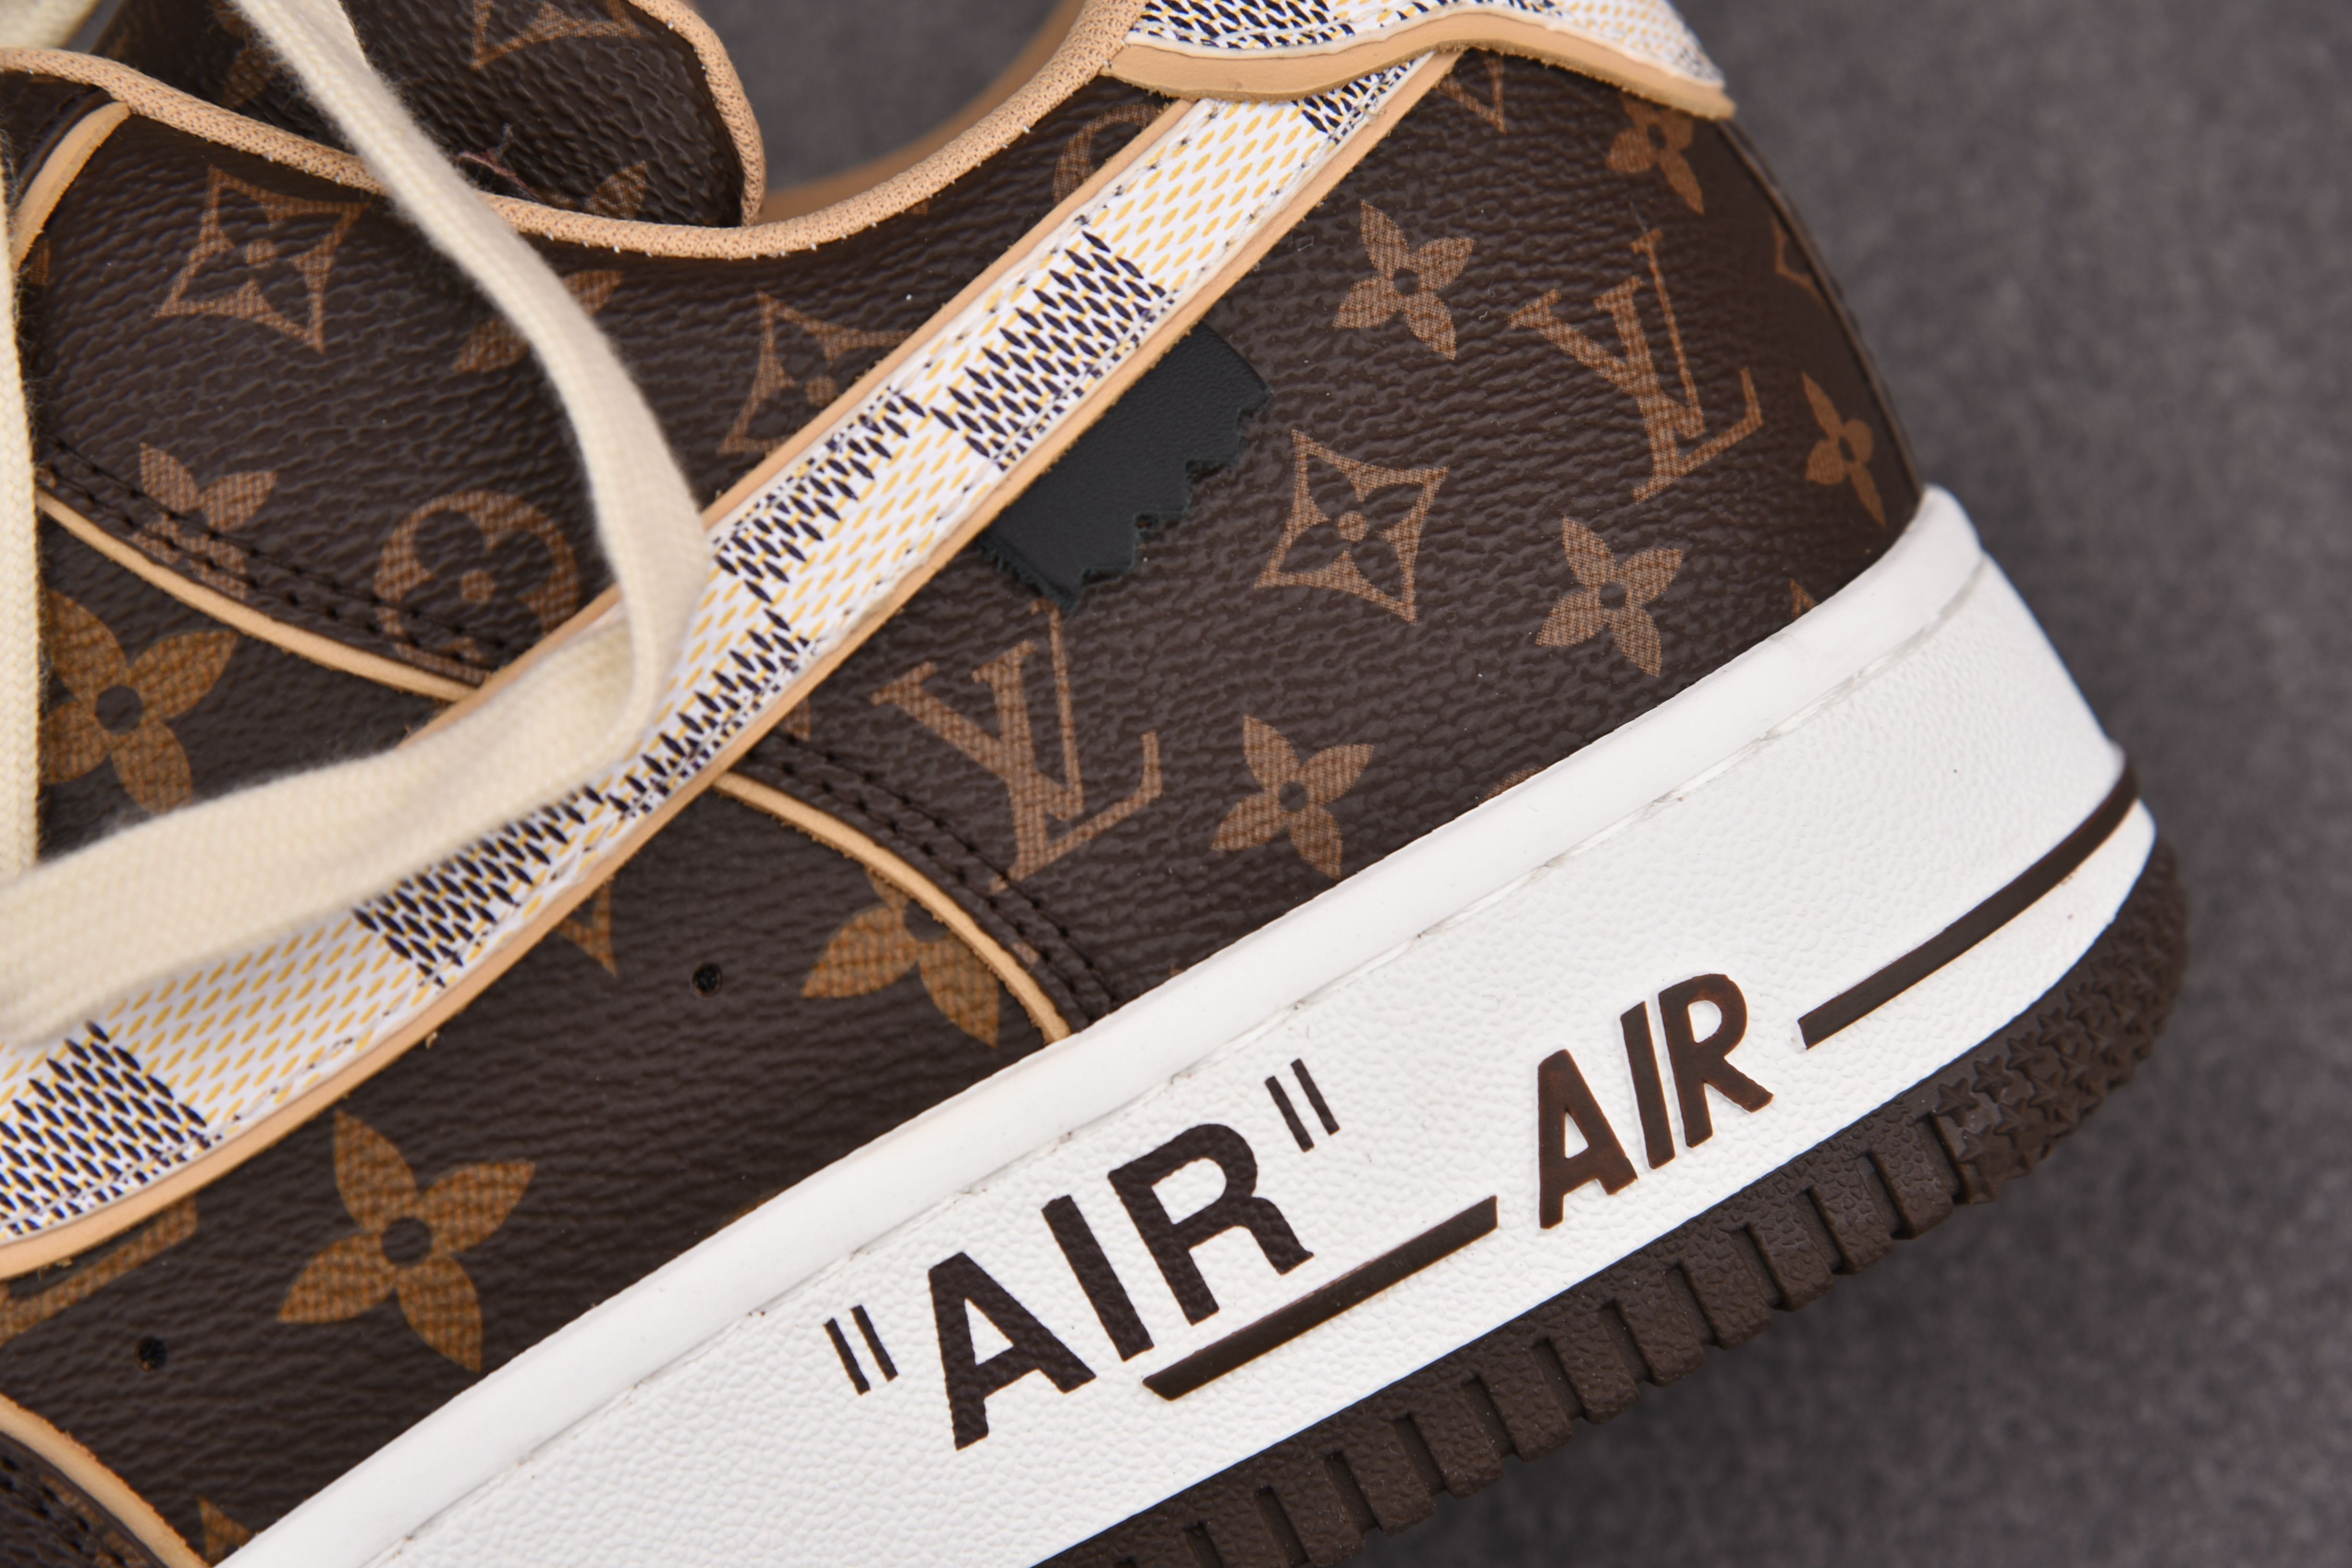 Nike Air Force 1 Low Louis Vuitton Off-White Monogram Brown Damier Azur (Be  careful about the size!!) - m.